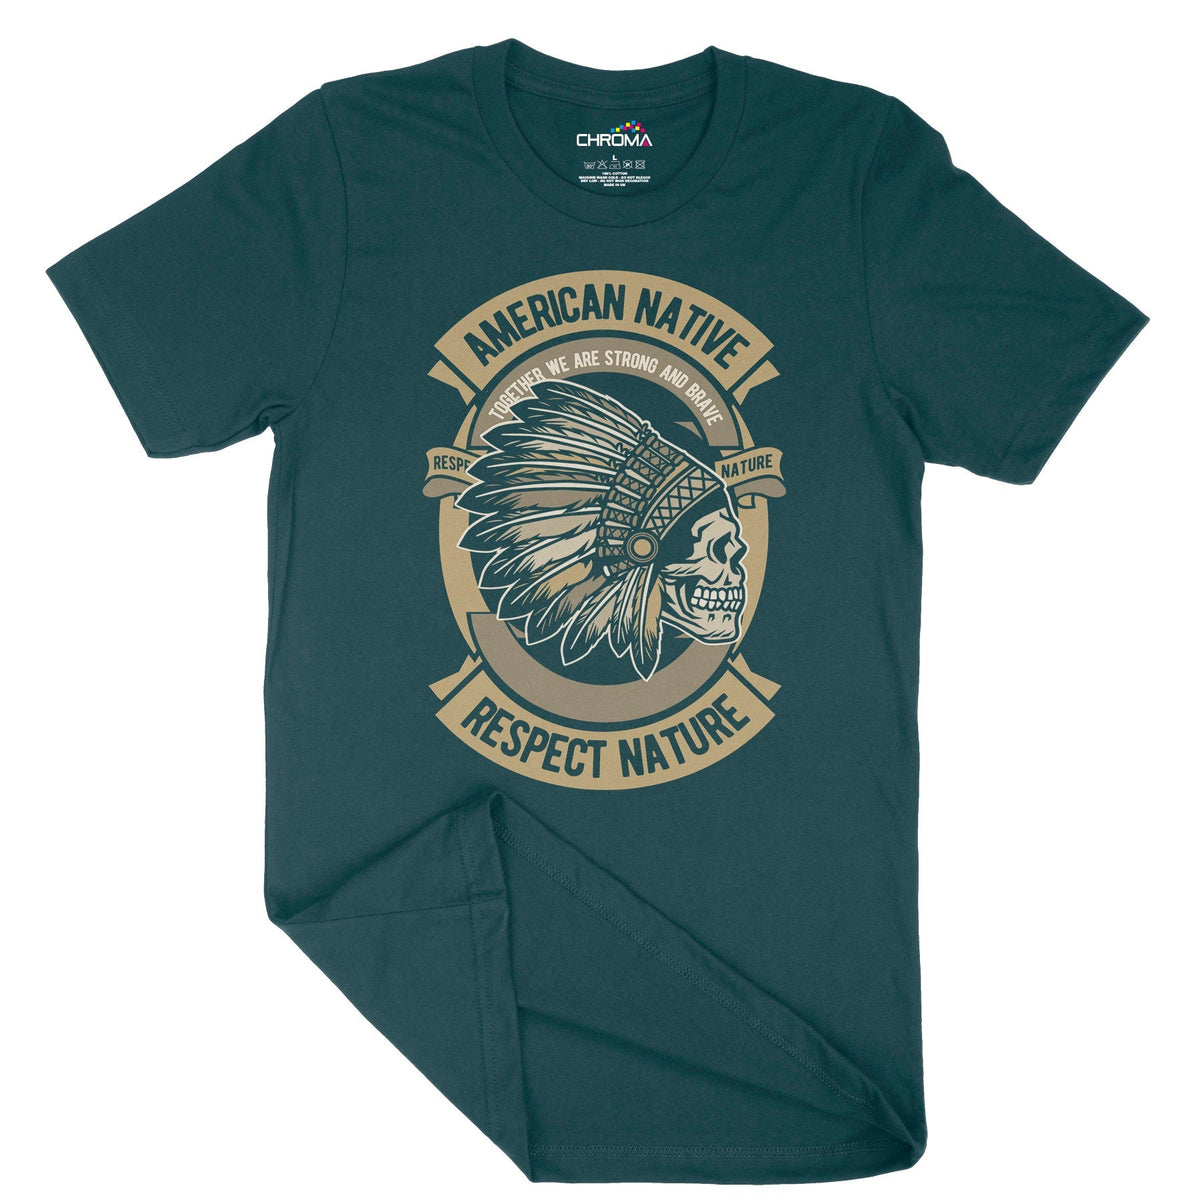 American Native | Vintage Adult T-Shirt | Classic Vintage Clothing Chroma Clothing